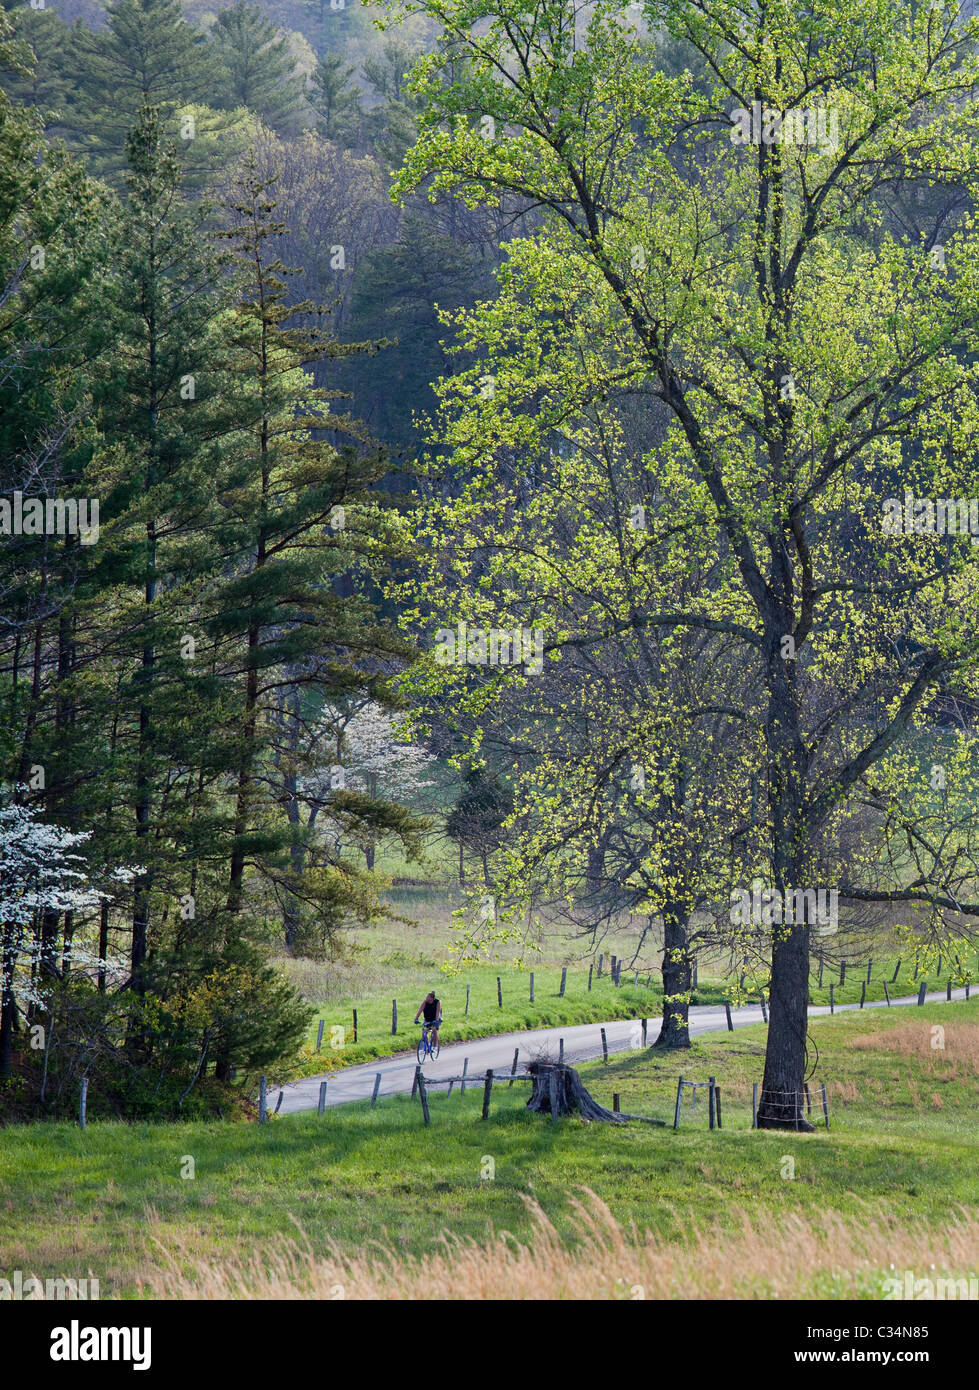 Great Smoky Mountains National Park, Tennessee - A bicycle rider on a road in Cades Cove. Stock Photo